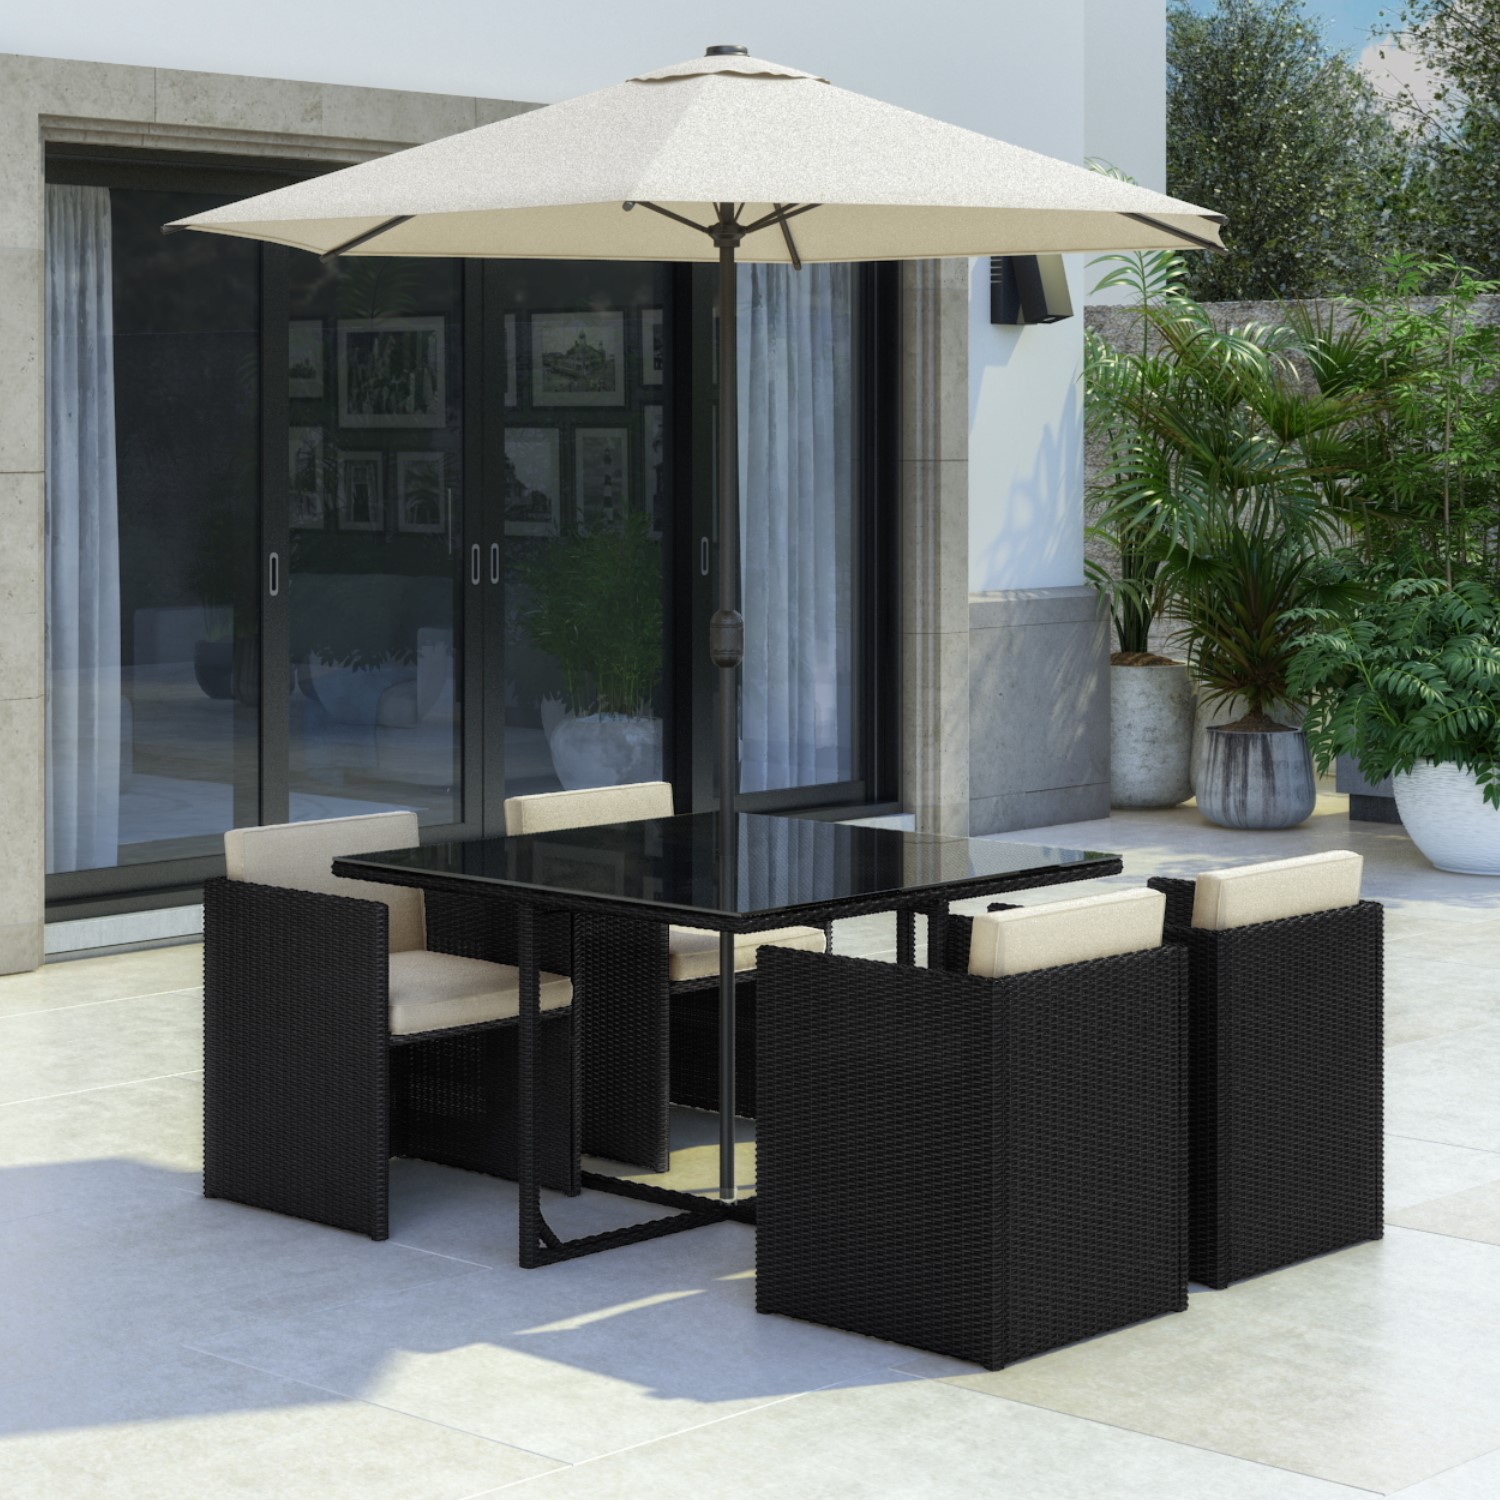 4 Seater Black Rattan Cube Dining Set Parasol Included Furniture123 - Cube 4 Seater Rattan Effect Patio Set